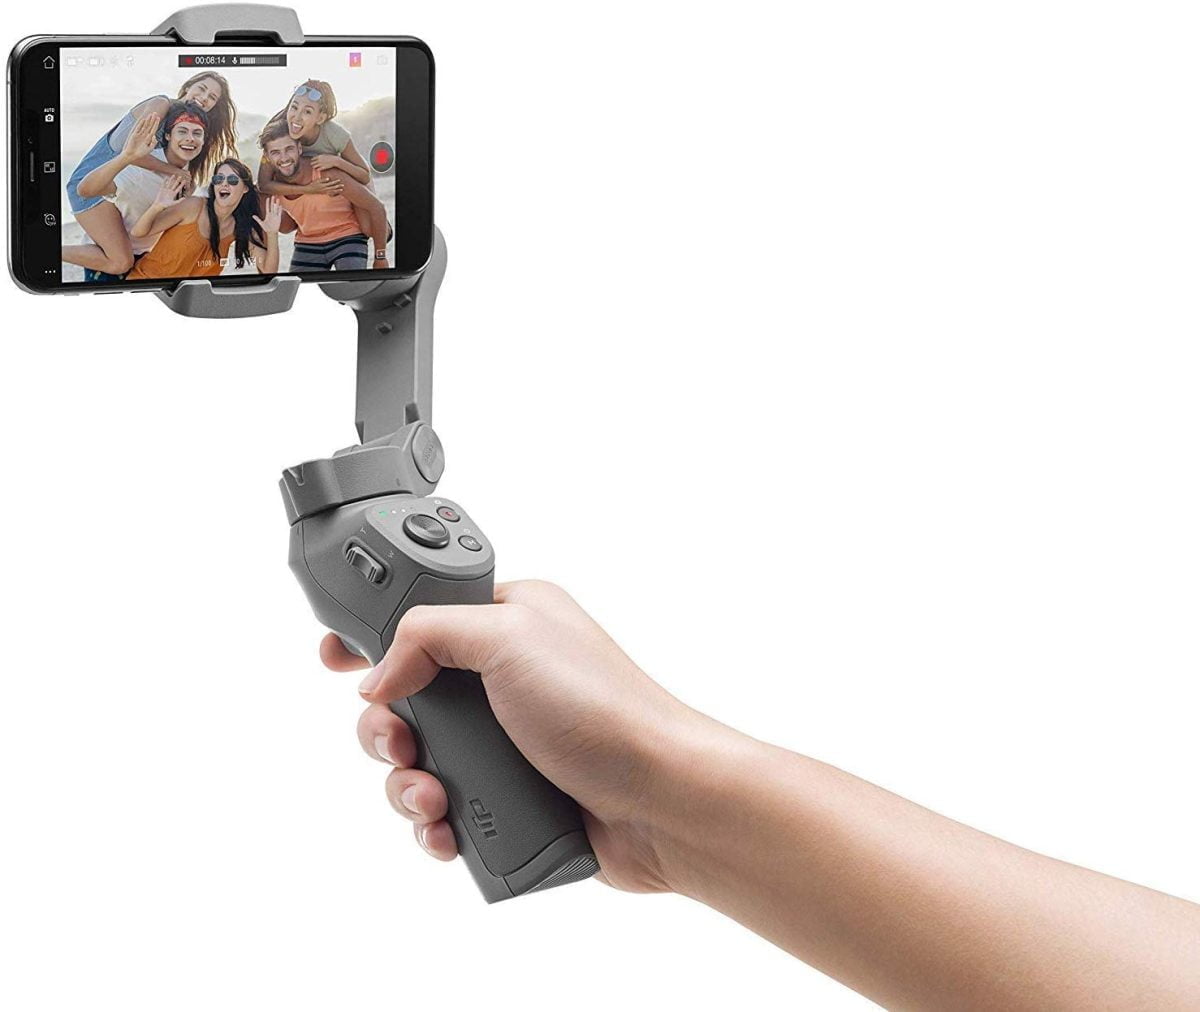 61J39Zabhql. Ac Sl1500 Dji &Lt;A Href=&Quot;Https://Www.dji.com/Ae/Osmo-Mobile-3?From=Store-Product-Page&Quot;&Gt;Osmo Mobile 3 Official Product Page&Lt;/A&Gt; &Lt;H2 Class=&Quot;Product-Name Logo&Quot;&Gt;&Lt;Img Src=&Quot;Https://Www1.Djicdn.com/Cms/Uploads/B1A101E64466A3542A81Baa5C8321F1D.svg&Quot; /&Gt;&Lt;/H2&Gt; &Lt;Div Class=&Quot;Product-Cover&Quot;&Gt; &Lt;Img Class=&Quot;Alignnone Size-Medium Wp-Image-5354&Quot; Src=&Quot;Https://Lablaab.com/Wp-Content/Uploads/2019/11/Annotation-2019-11-05-113239-300X92.Jpg&Quot; Alt=&Quot;&Quot; Width=&Quot;300&Quot; Height=&Quot;92&Quot; /&Gt; 1. Slow Motion Is Currently Only Supported By Ios Devices. 2. You Can Also Transition Between Portrait And Landscape Mode By Rotating The Roll Axis Manually. 3. Activate This Function In Settings. By Default, If You Press The M Button Once, You Can Quickly Switch Between Taking A Photo And Recording A Video. &Lt;/Div&Gt; Dji Osmo Mobile 3